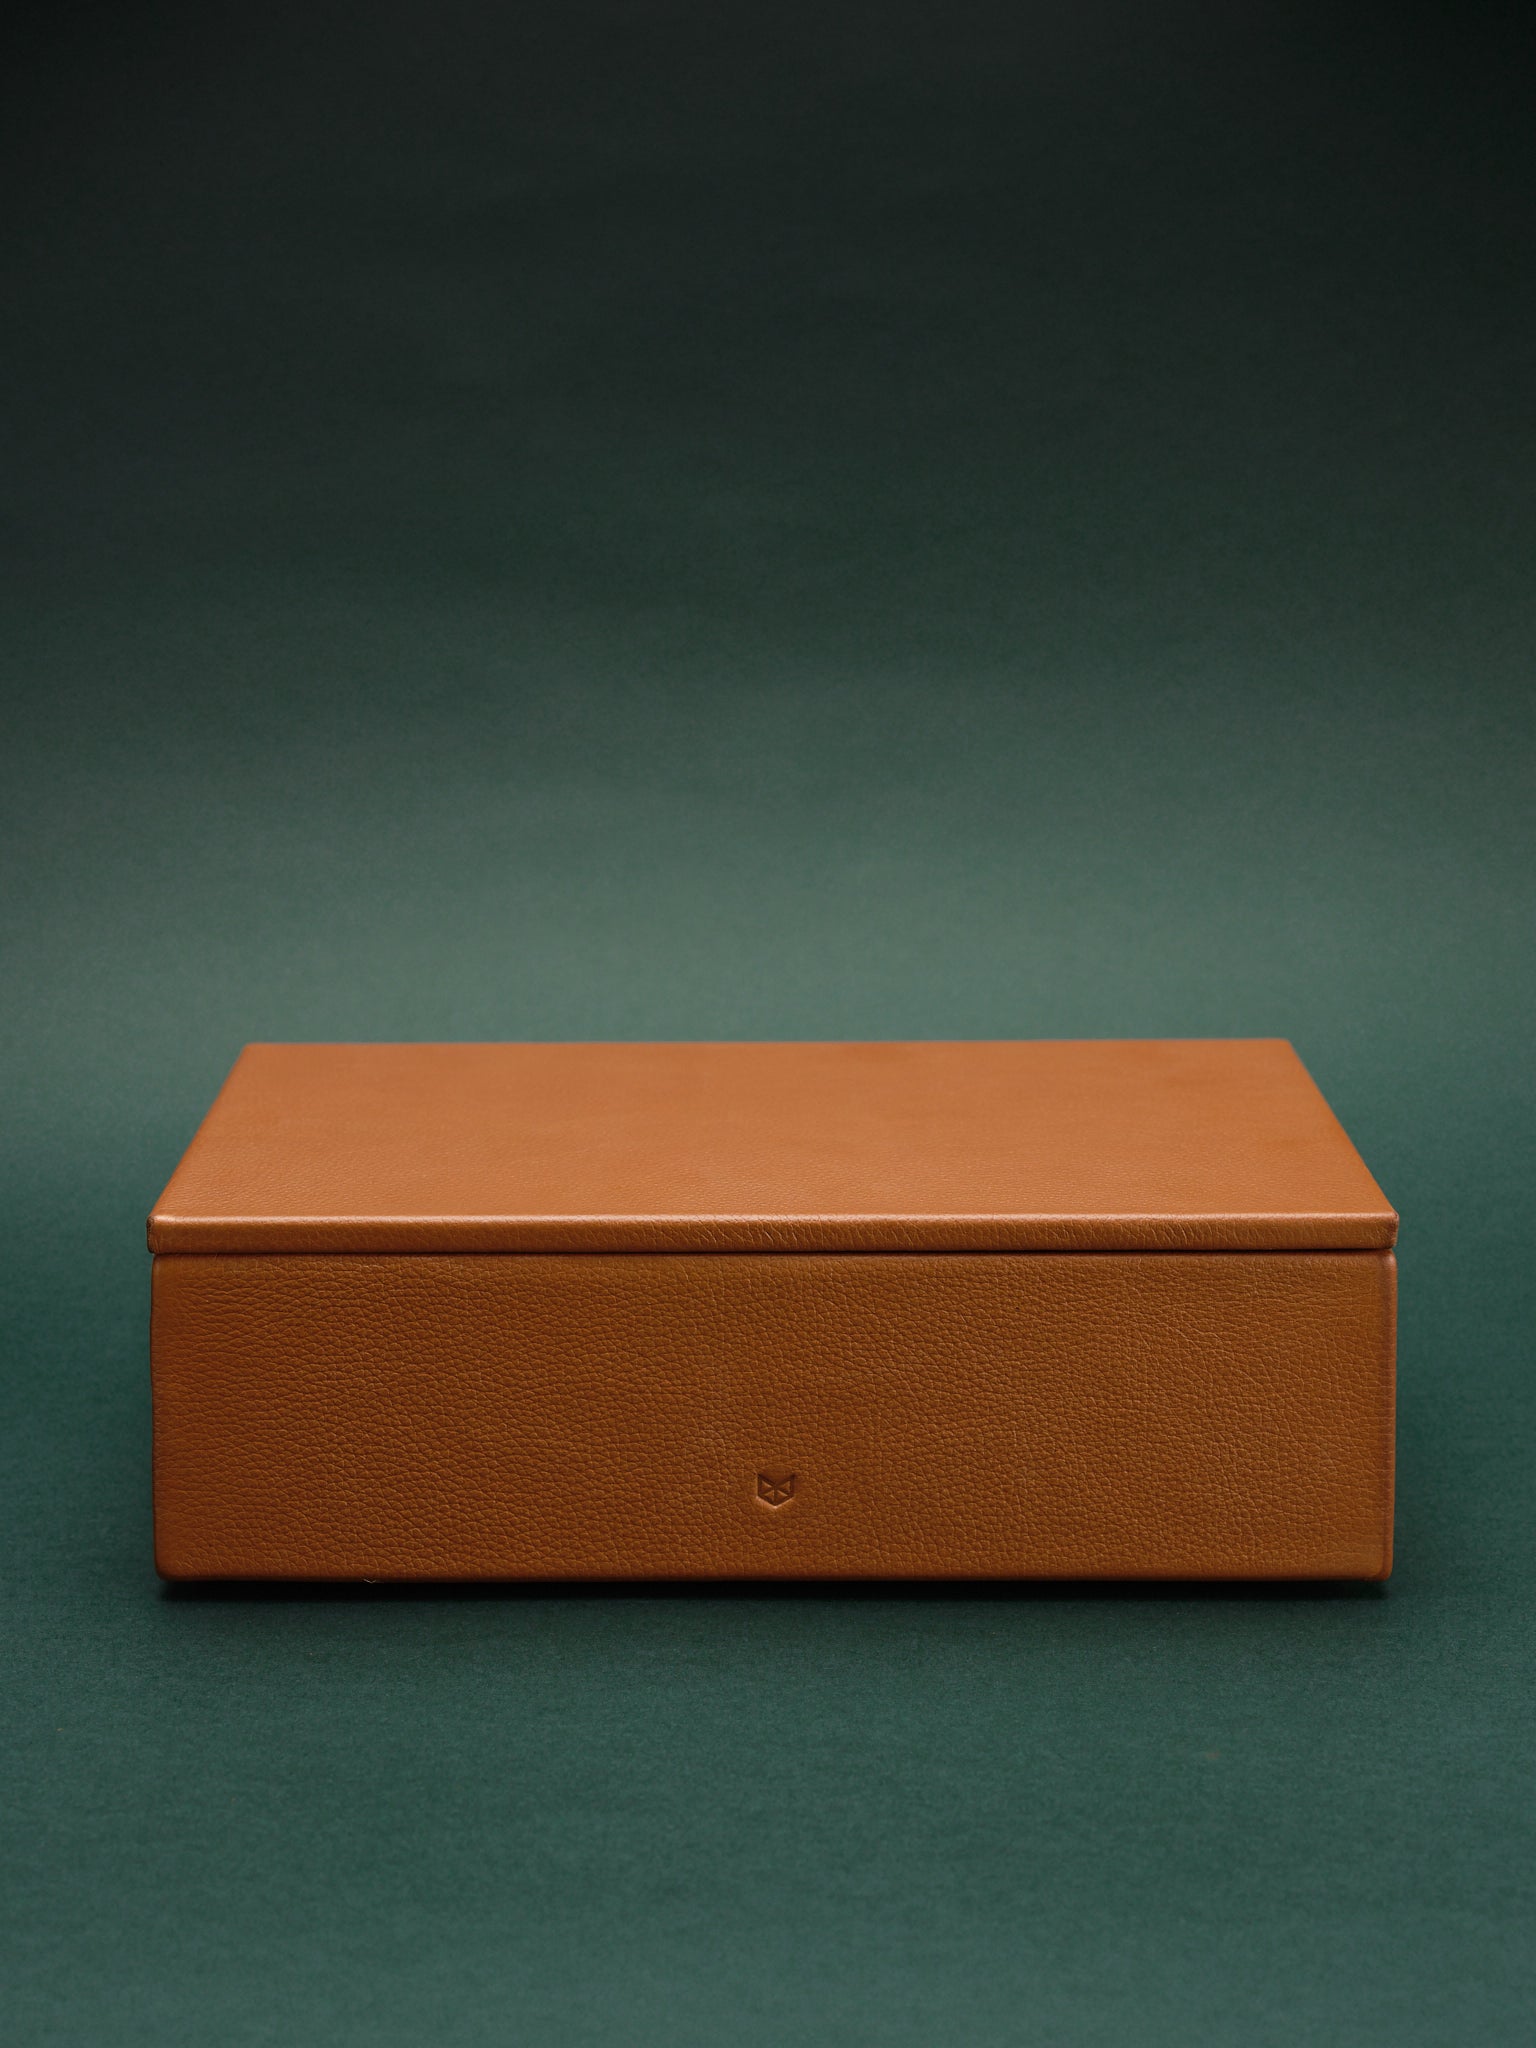 Watch Display Case Tan by Capra Leather